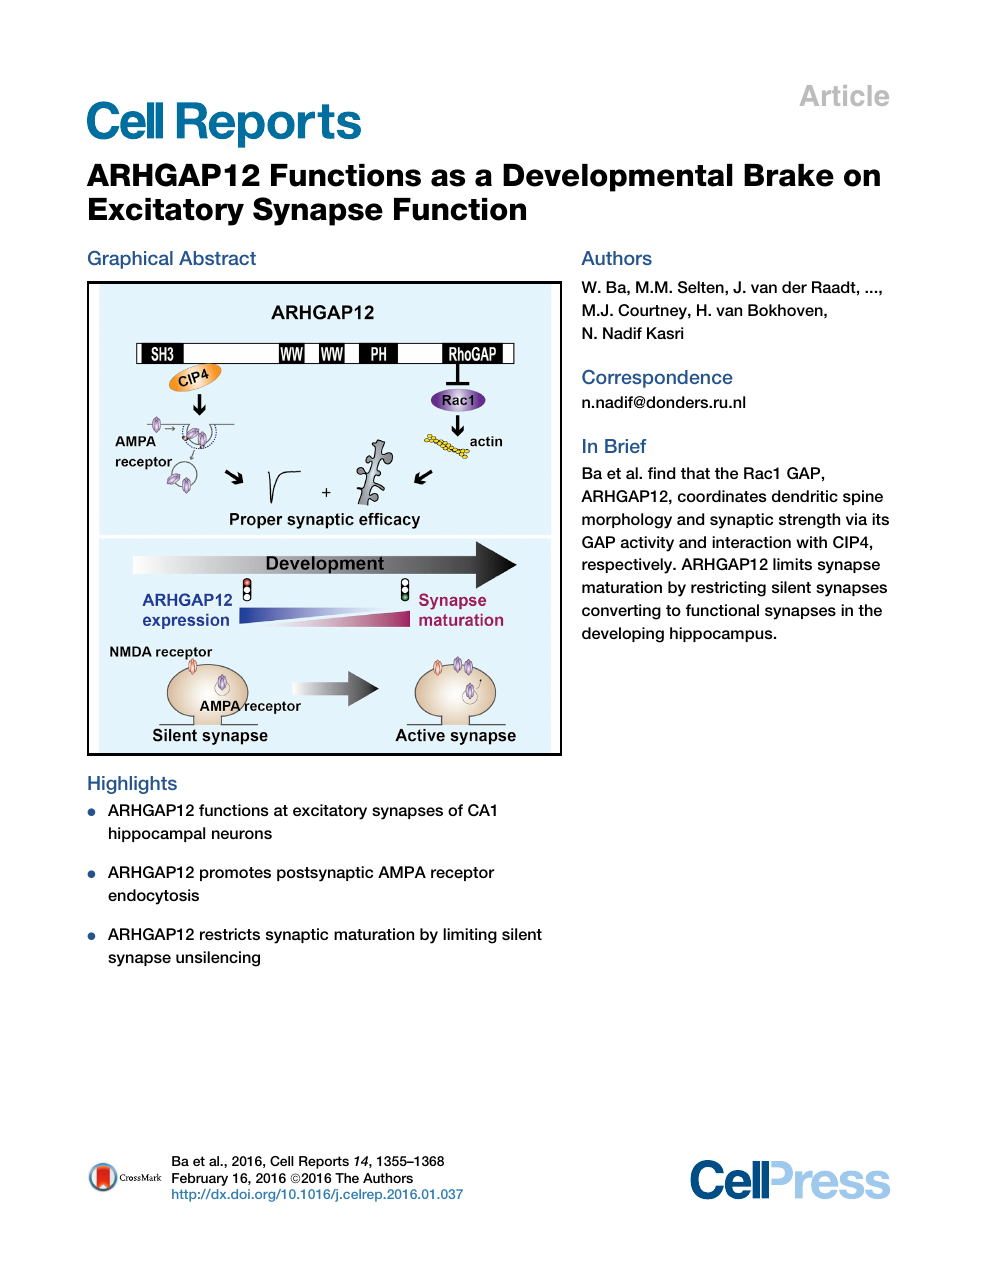 Arhgap12 Functions As A Developmental Brake On Excitatory Synapse Function Topic Of Research Paper In Biological Sciences Download Scholarly Article Pdf And Read For Free On Cyberleninka Open Science Hub